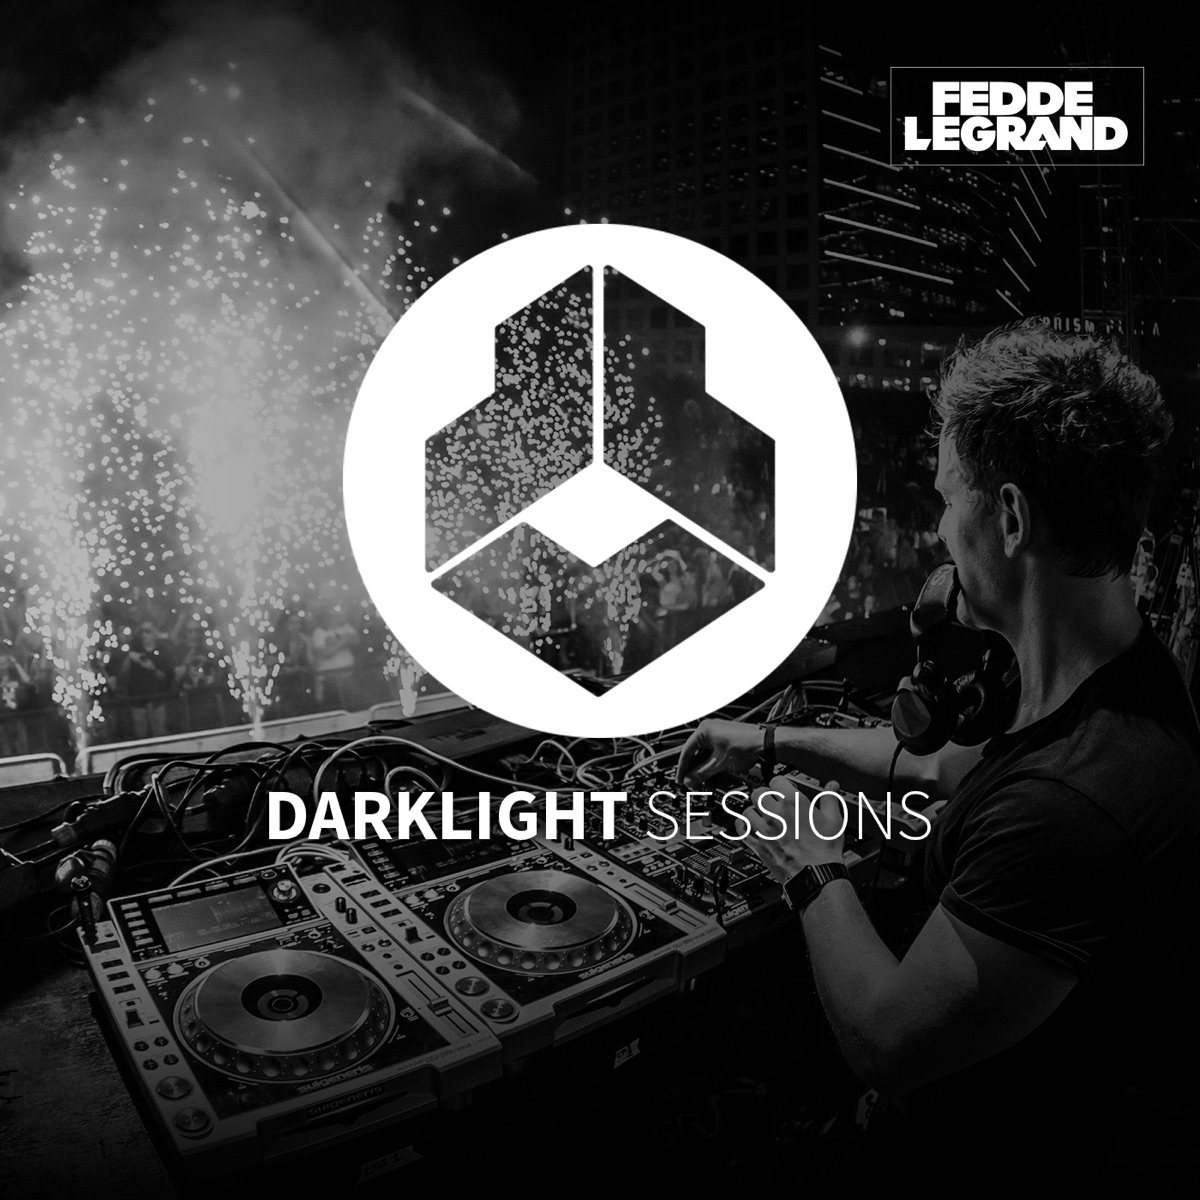 Emission podcast Fedde Le Grand - Darklight sessions by Fedde Le Grand